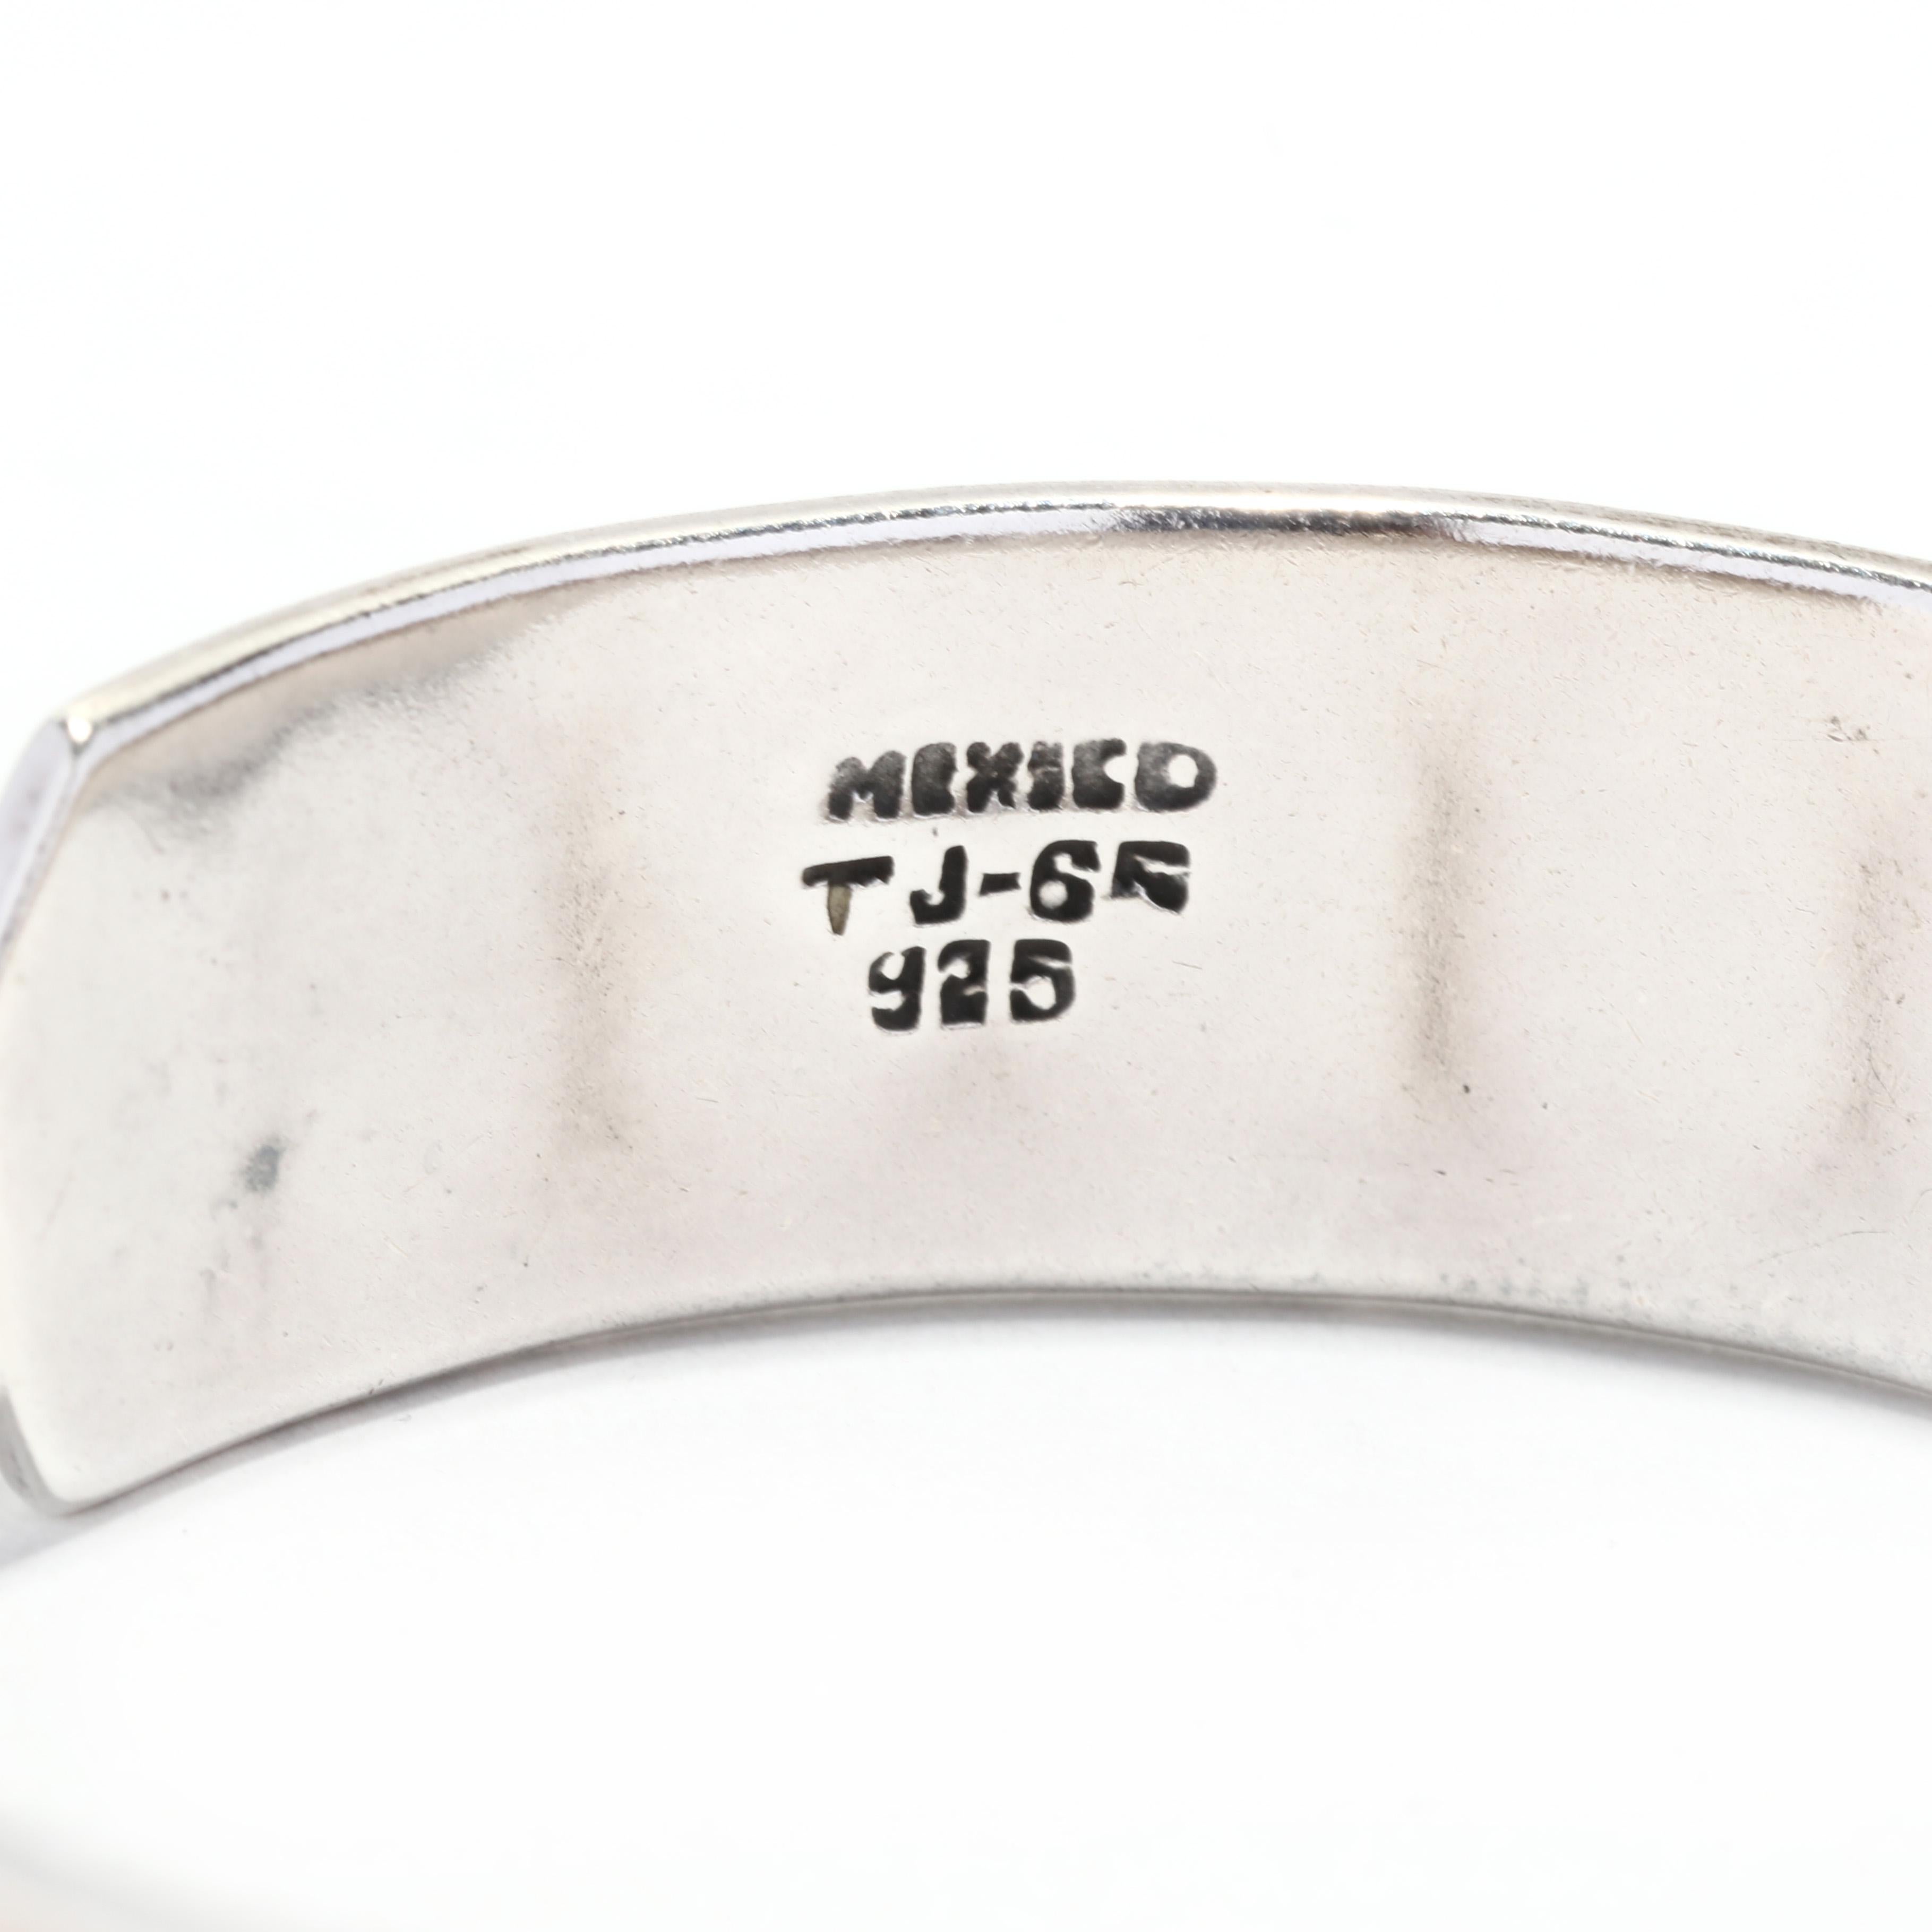 Studded Cuff Bracelet, Sterling Silver, Mexican Cuff 1